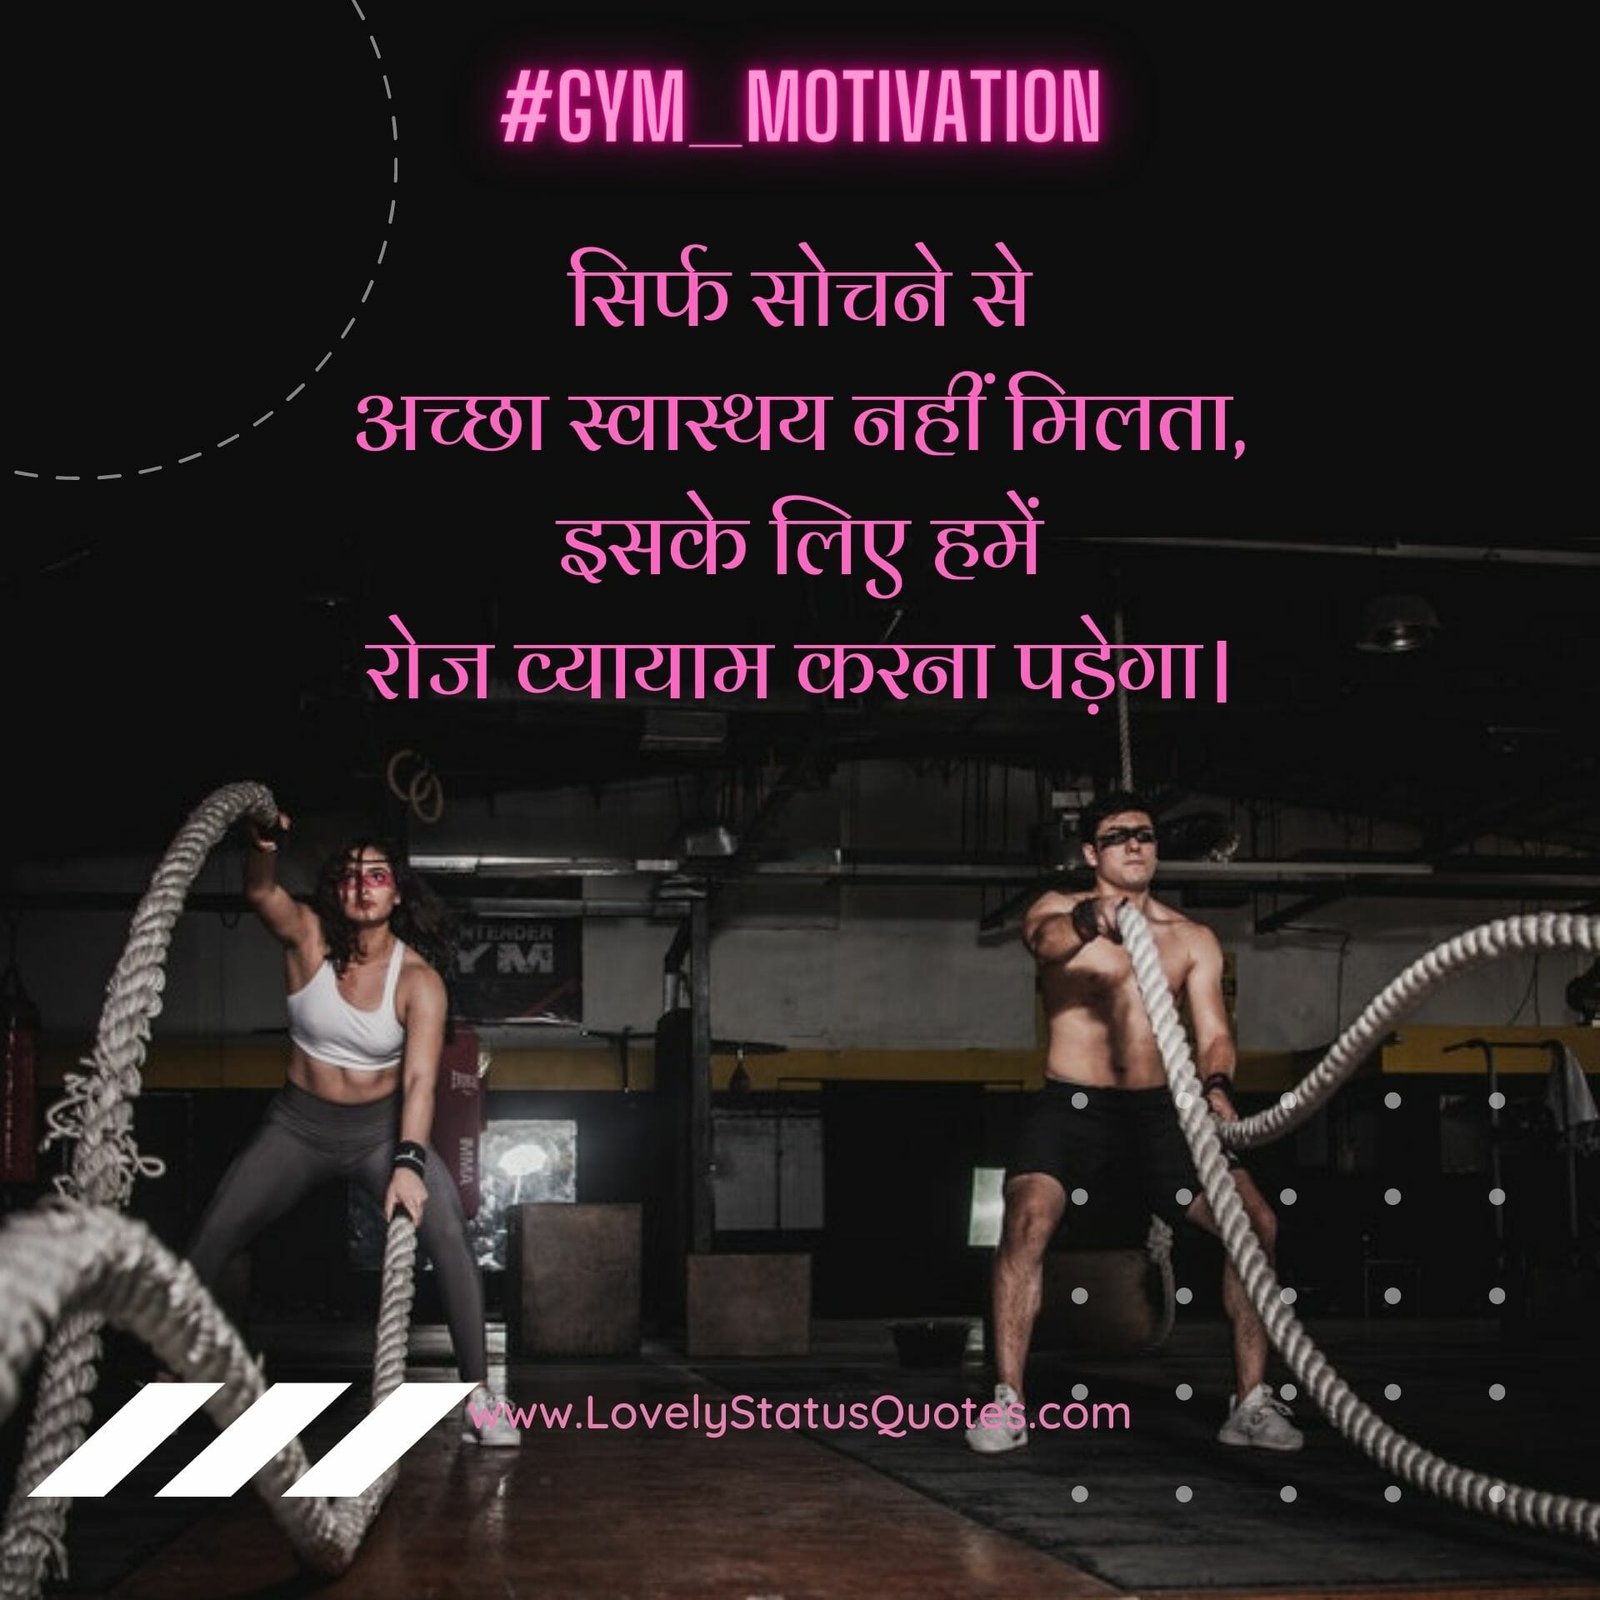 Gym weight loss motivational quotes in hindi